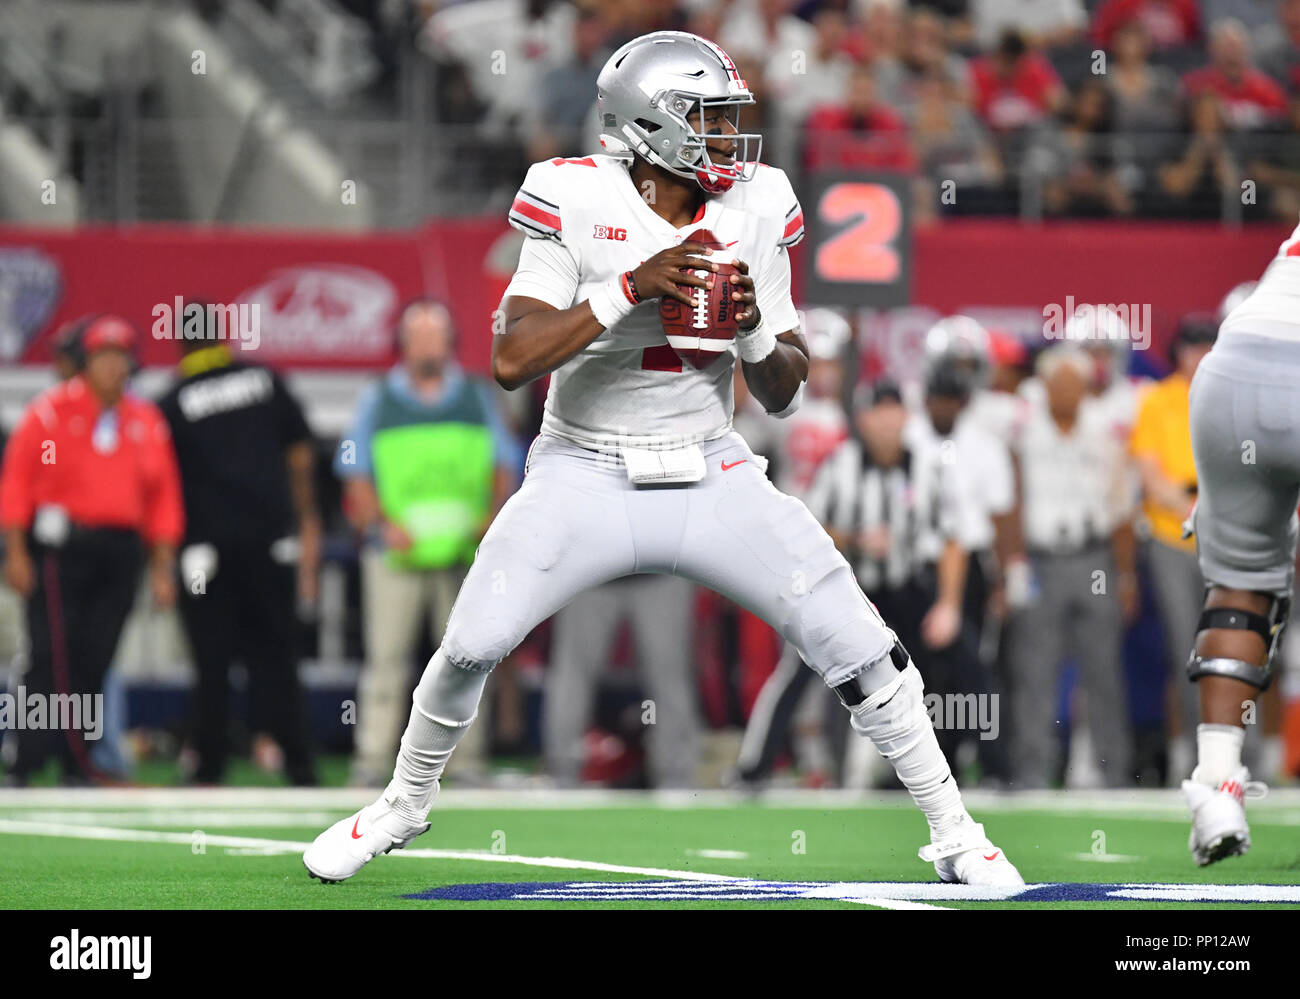 September 15, 2018: Ohio State Buckeyes quarterback Dwayne Haskins #7 in the AdvoCare Showdown NCAA Football game between the Ohio State Buckeyes and the TCU Horned Frogs at AT&T Stadium in Arlington, TX Ohio defeated TCU 40-28 Albert Pena/CSM Stock Photo